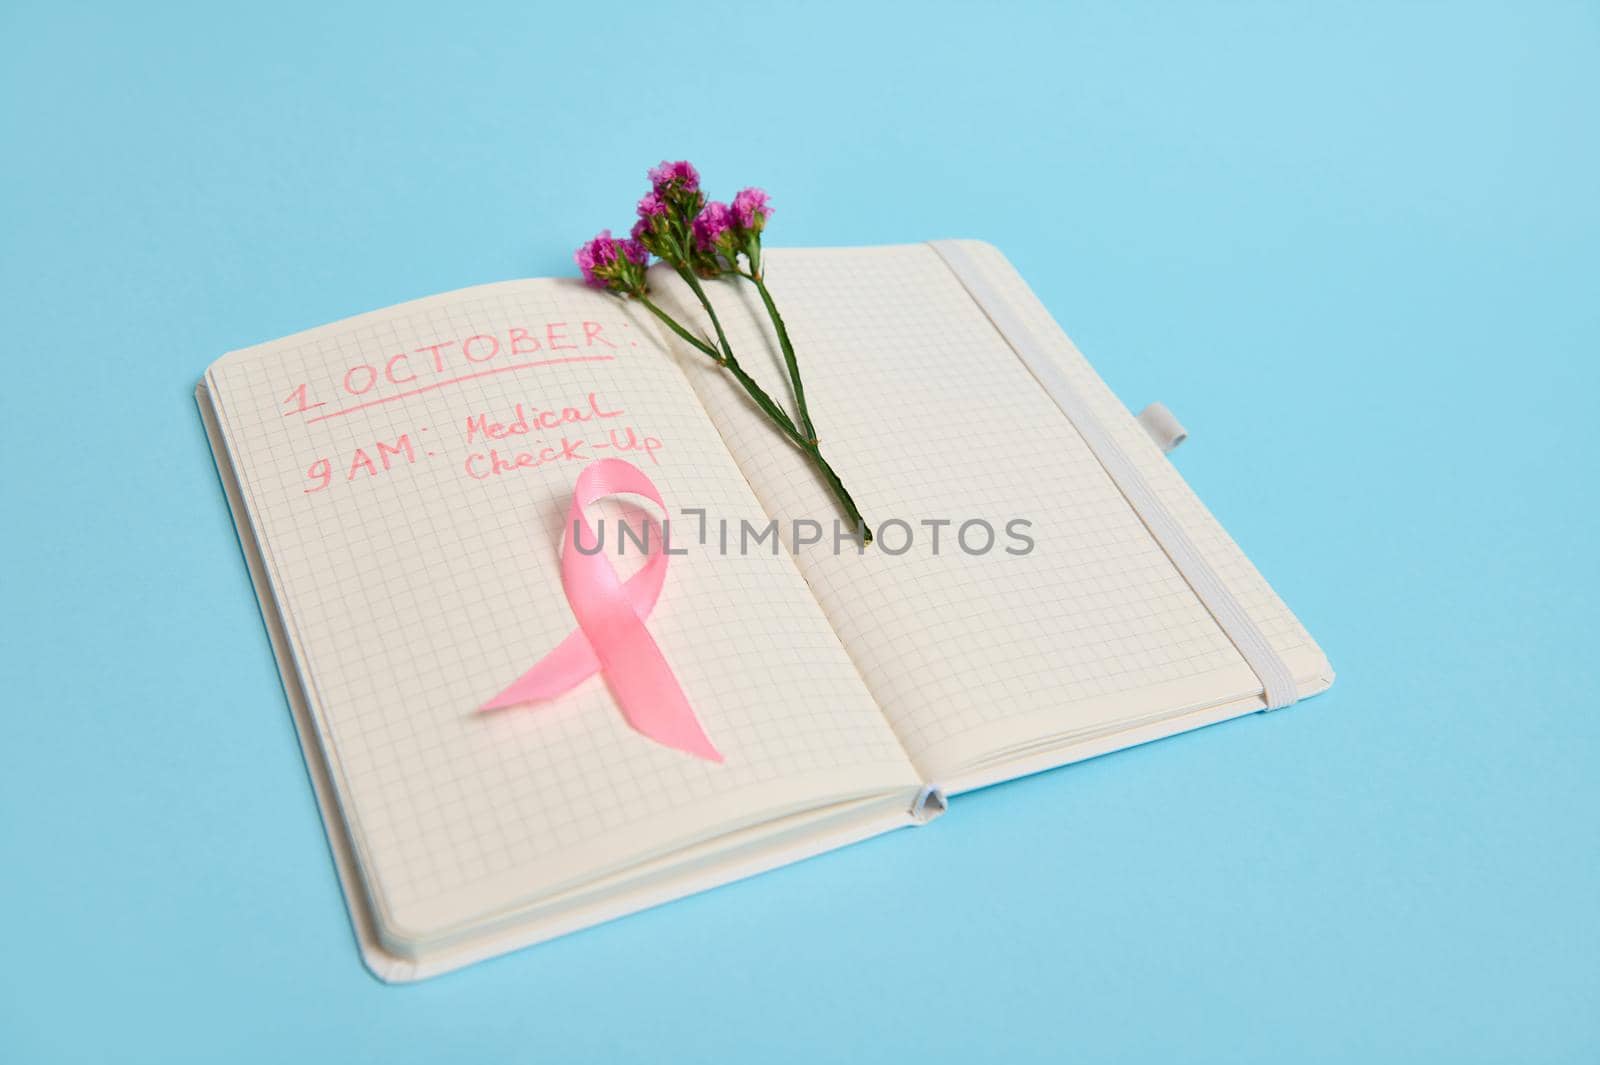 Flower and pink ribbon, symbol of Breast Cancer Awareness Day, lying on a page with a line of notepad with inscriptions reminding of a medical examination. October 1st, International Breast Cancer Day by artgf